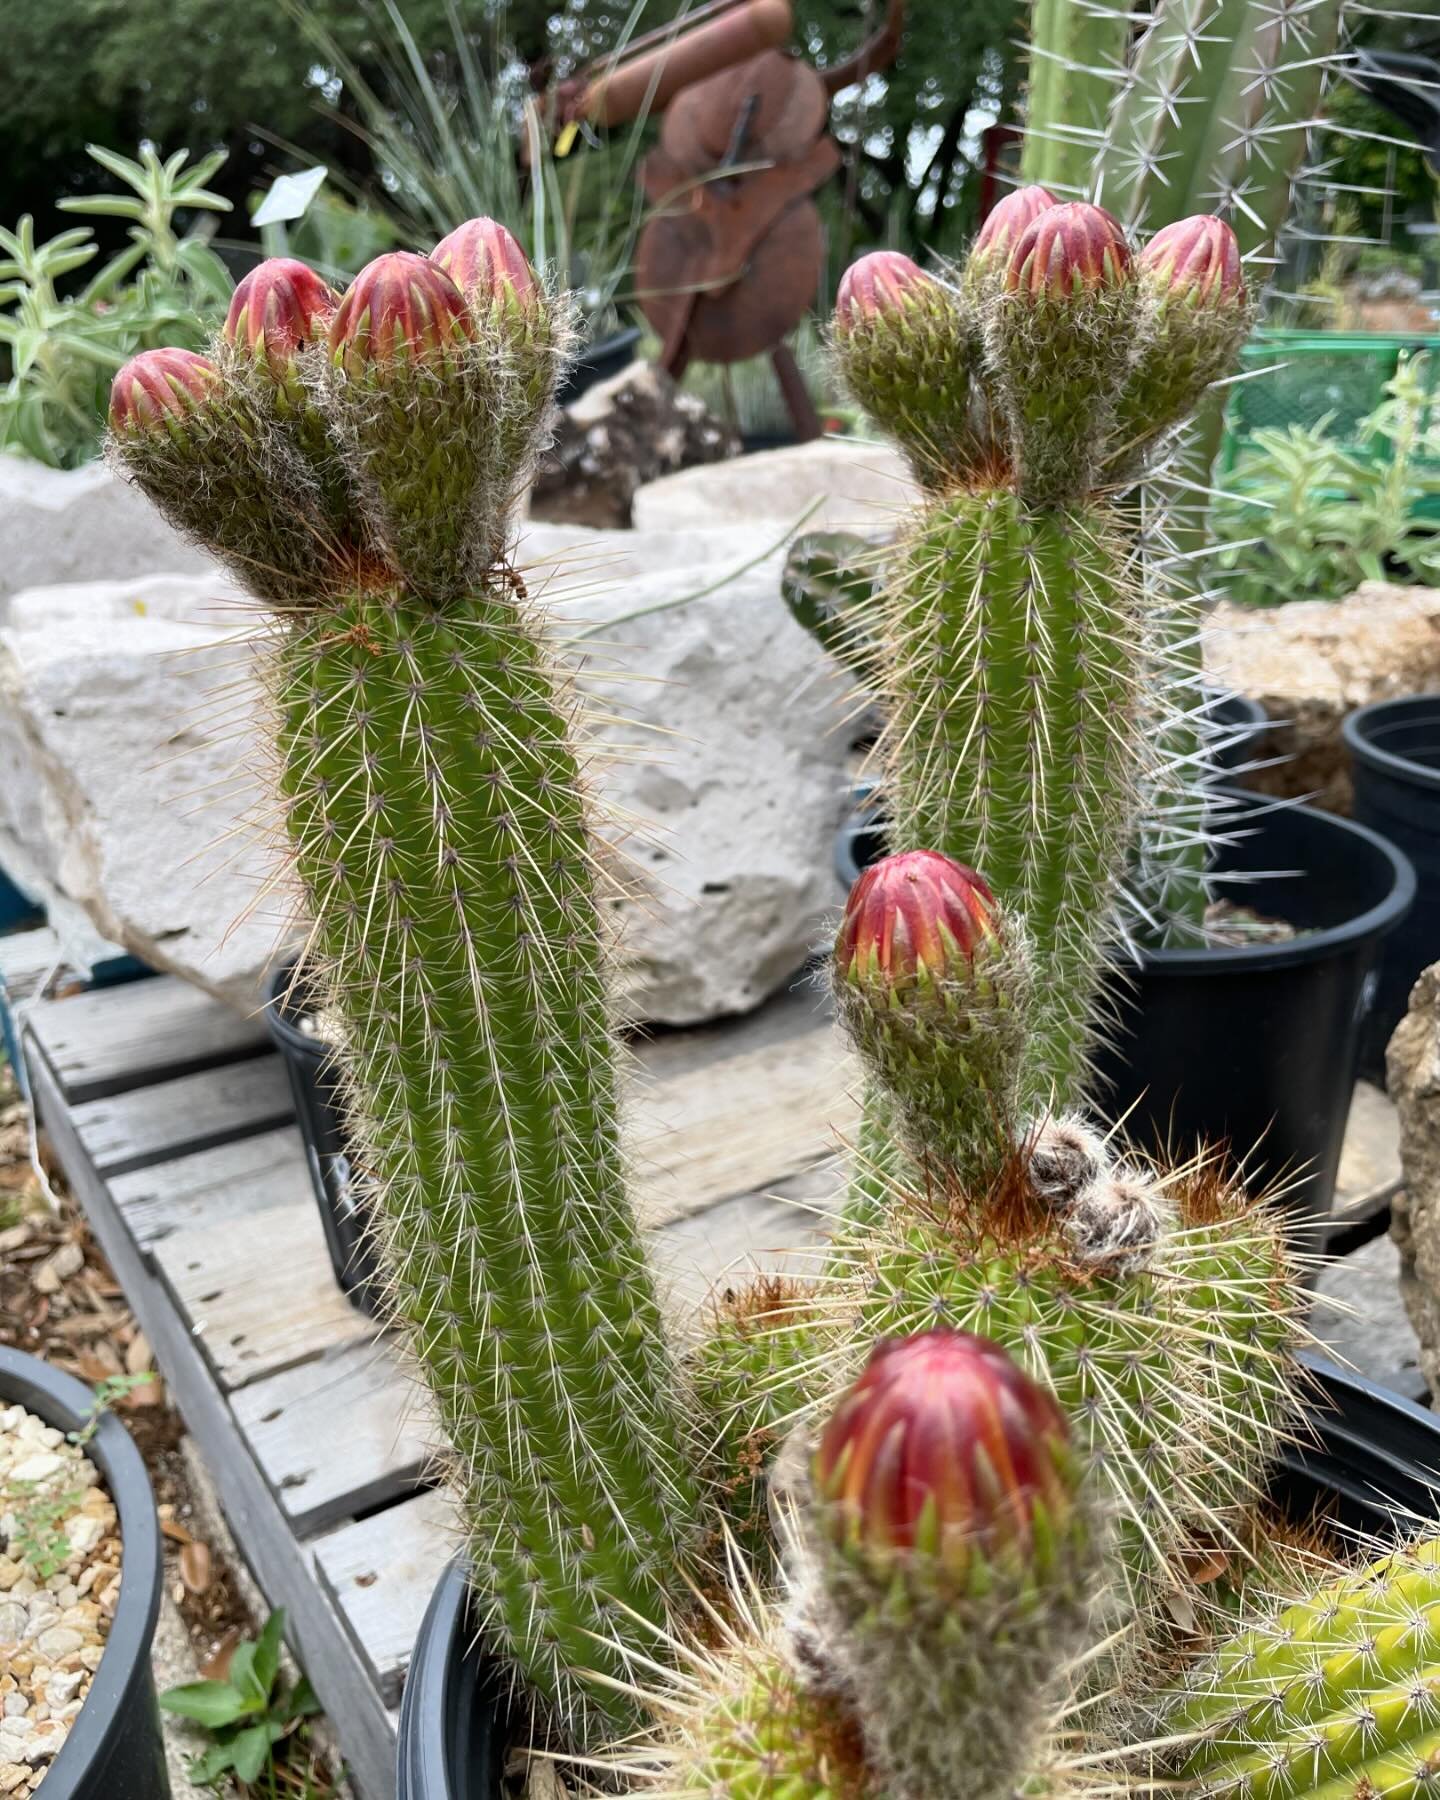 Trumpet Cactus Tricholobivia (hyb.), commonly known as Trumpet Flower Cactus.
Waiting with bated breath for these buds to bloom. Stay tuned!